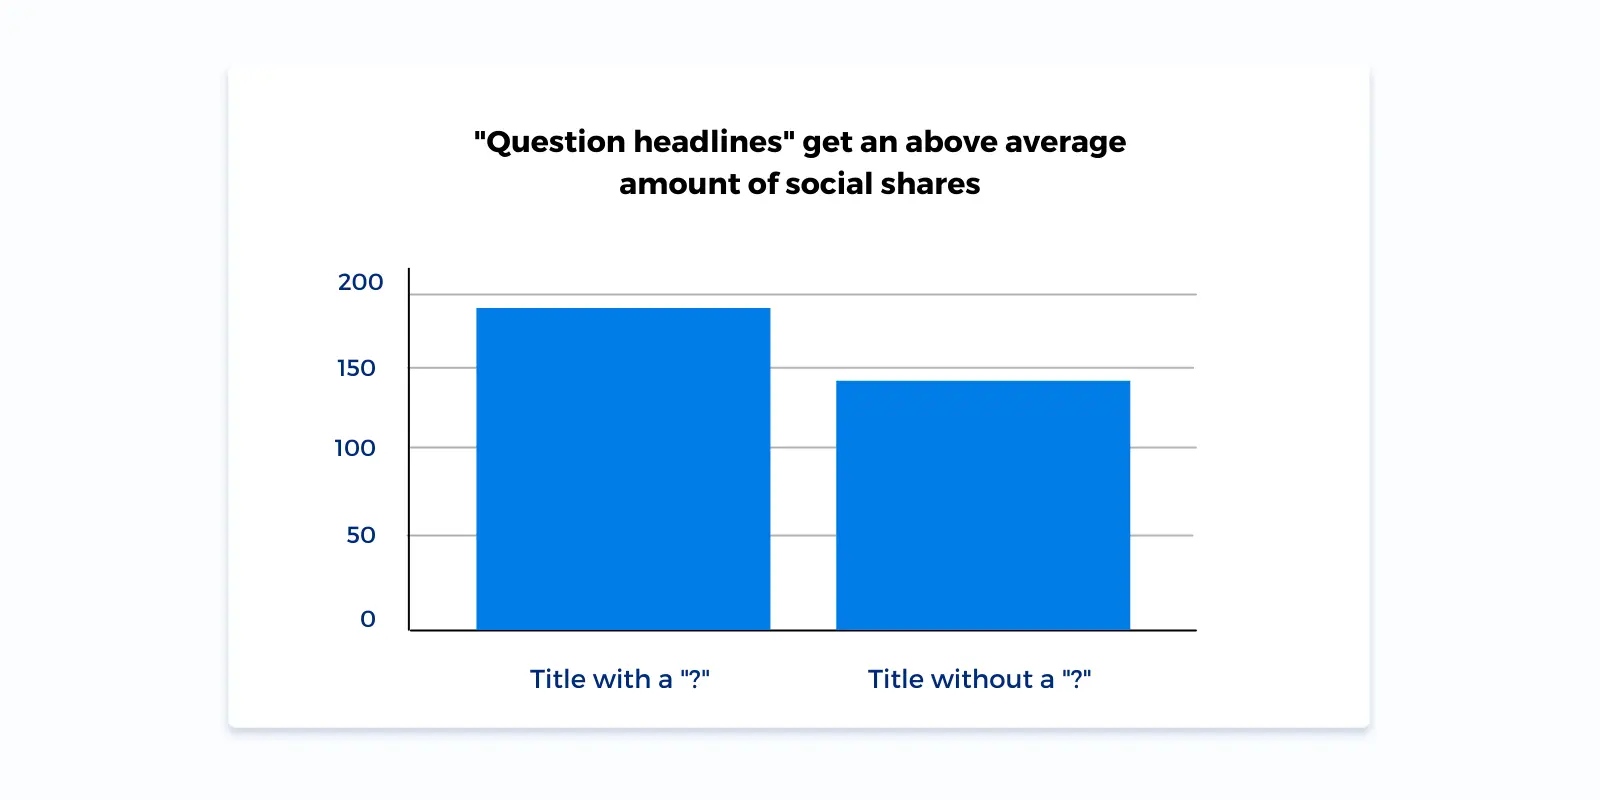 Question headlines get an above average amount of social shares